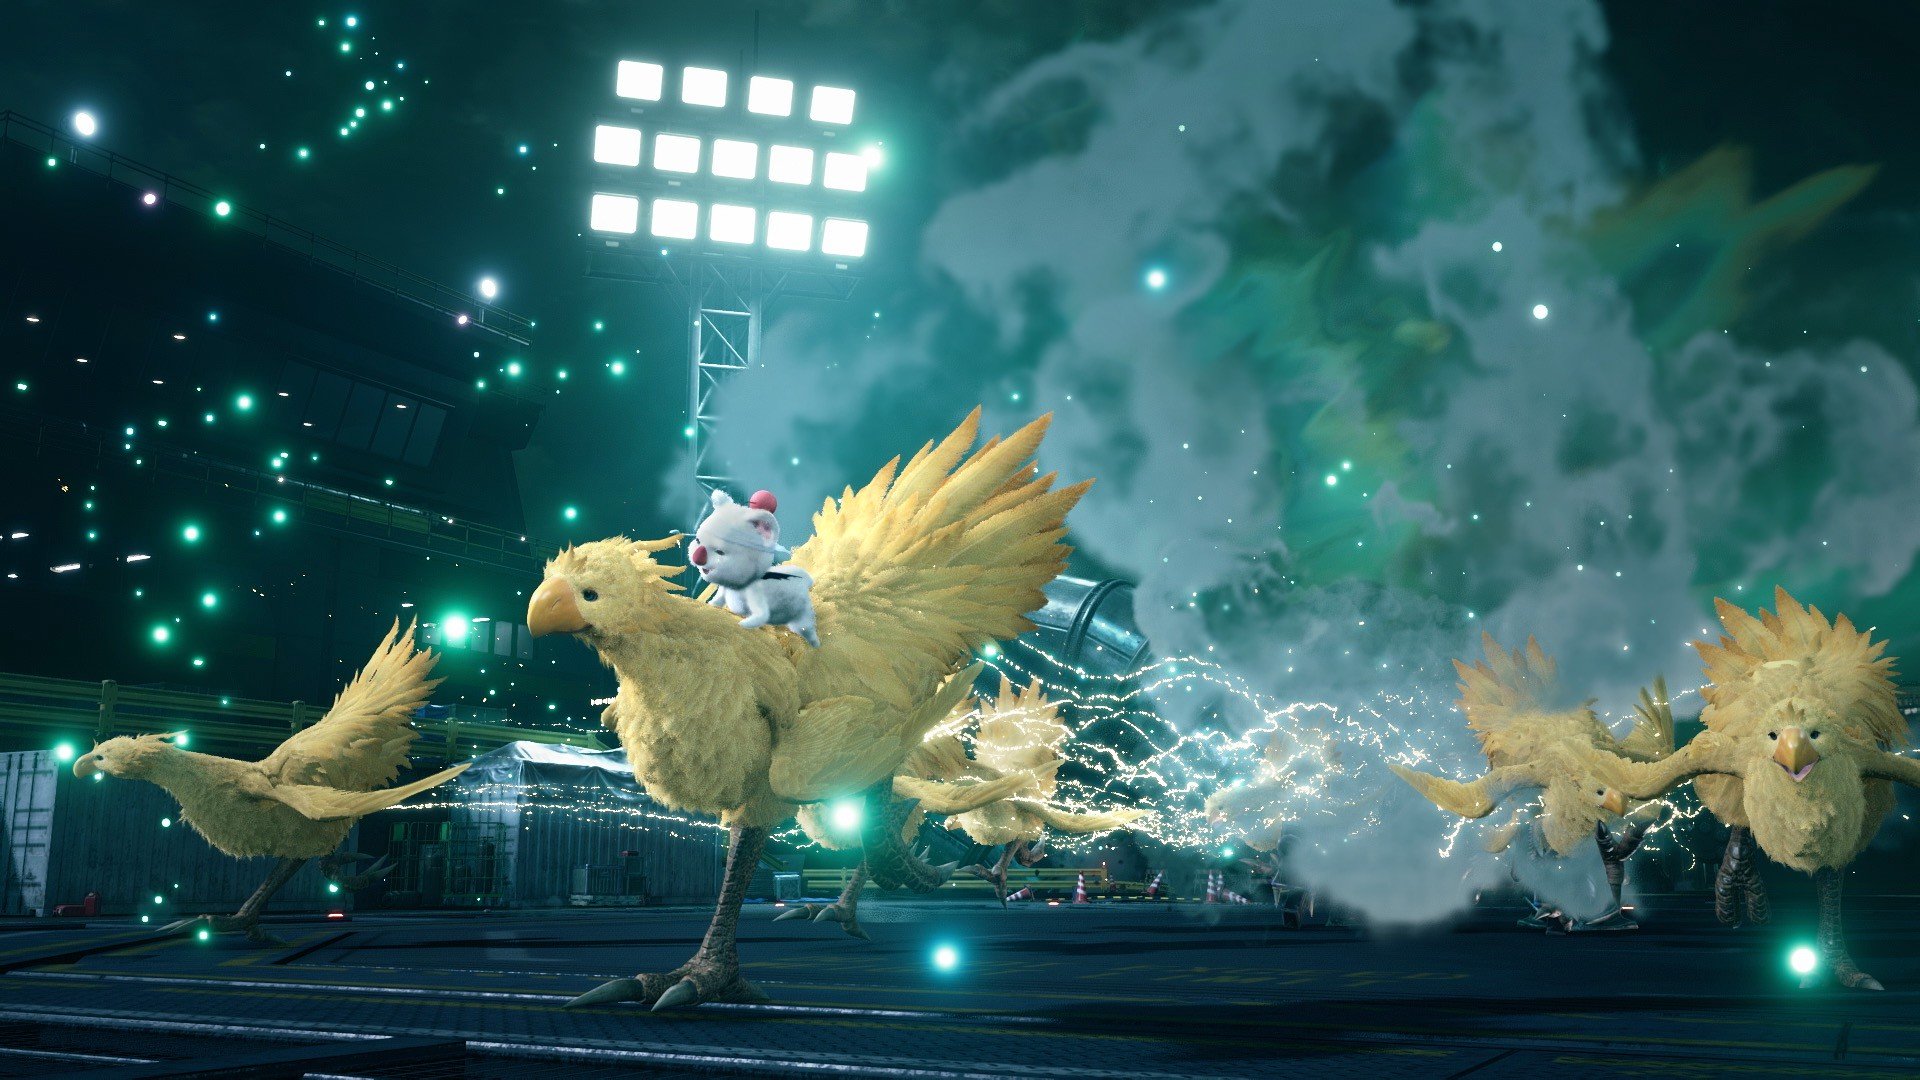 Chocobo and Moogle in the Final Fantasy 7 remake